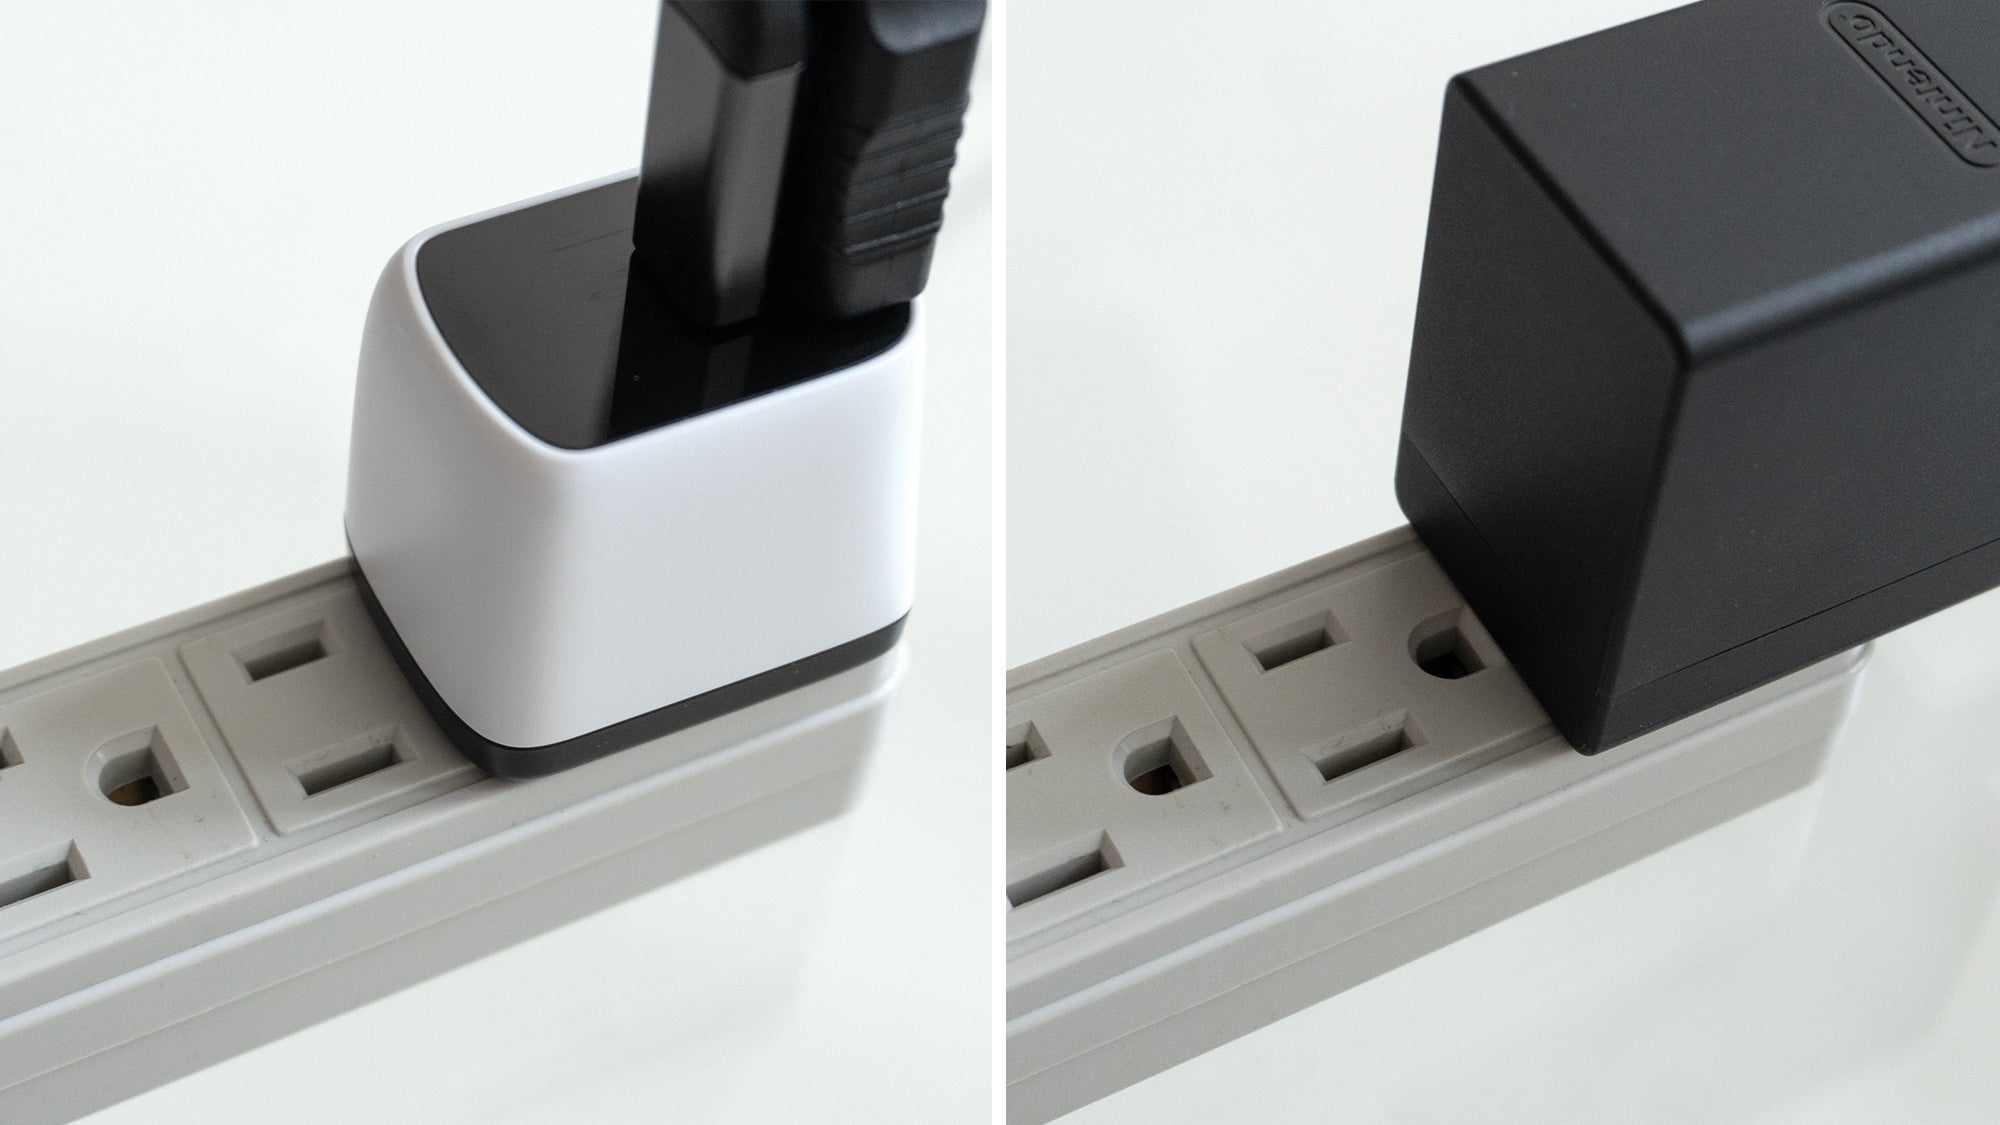 The position of the prongs on the back of the Covert Dock Mini covered a neighbouring outlet on the power bar I tested it with, but this was not a problem with the device plugged directly into a wall outlet. (Photo: Andrew Liszewski | Gizmodo)